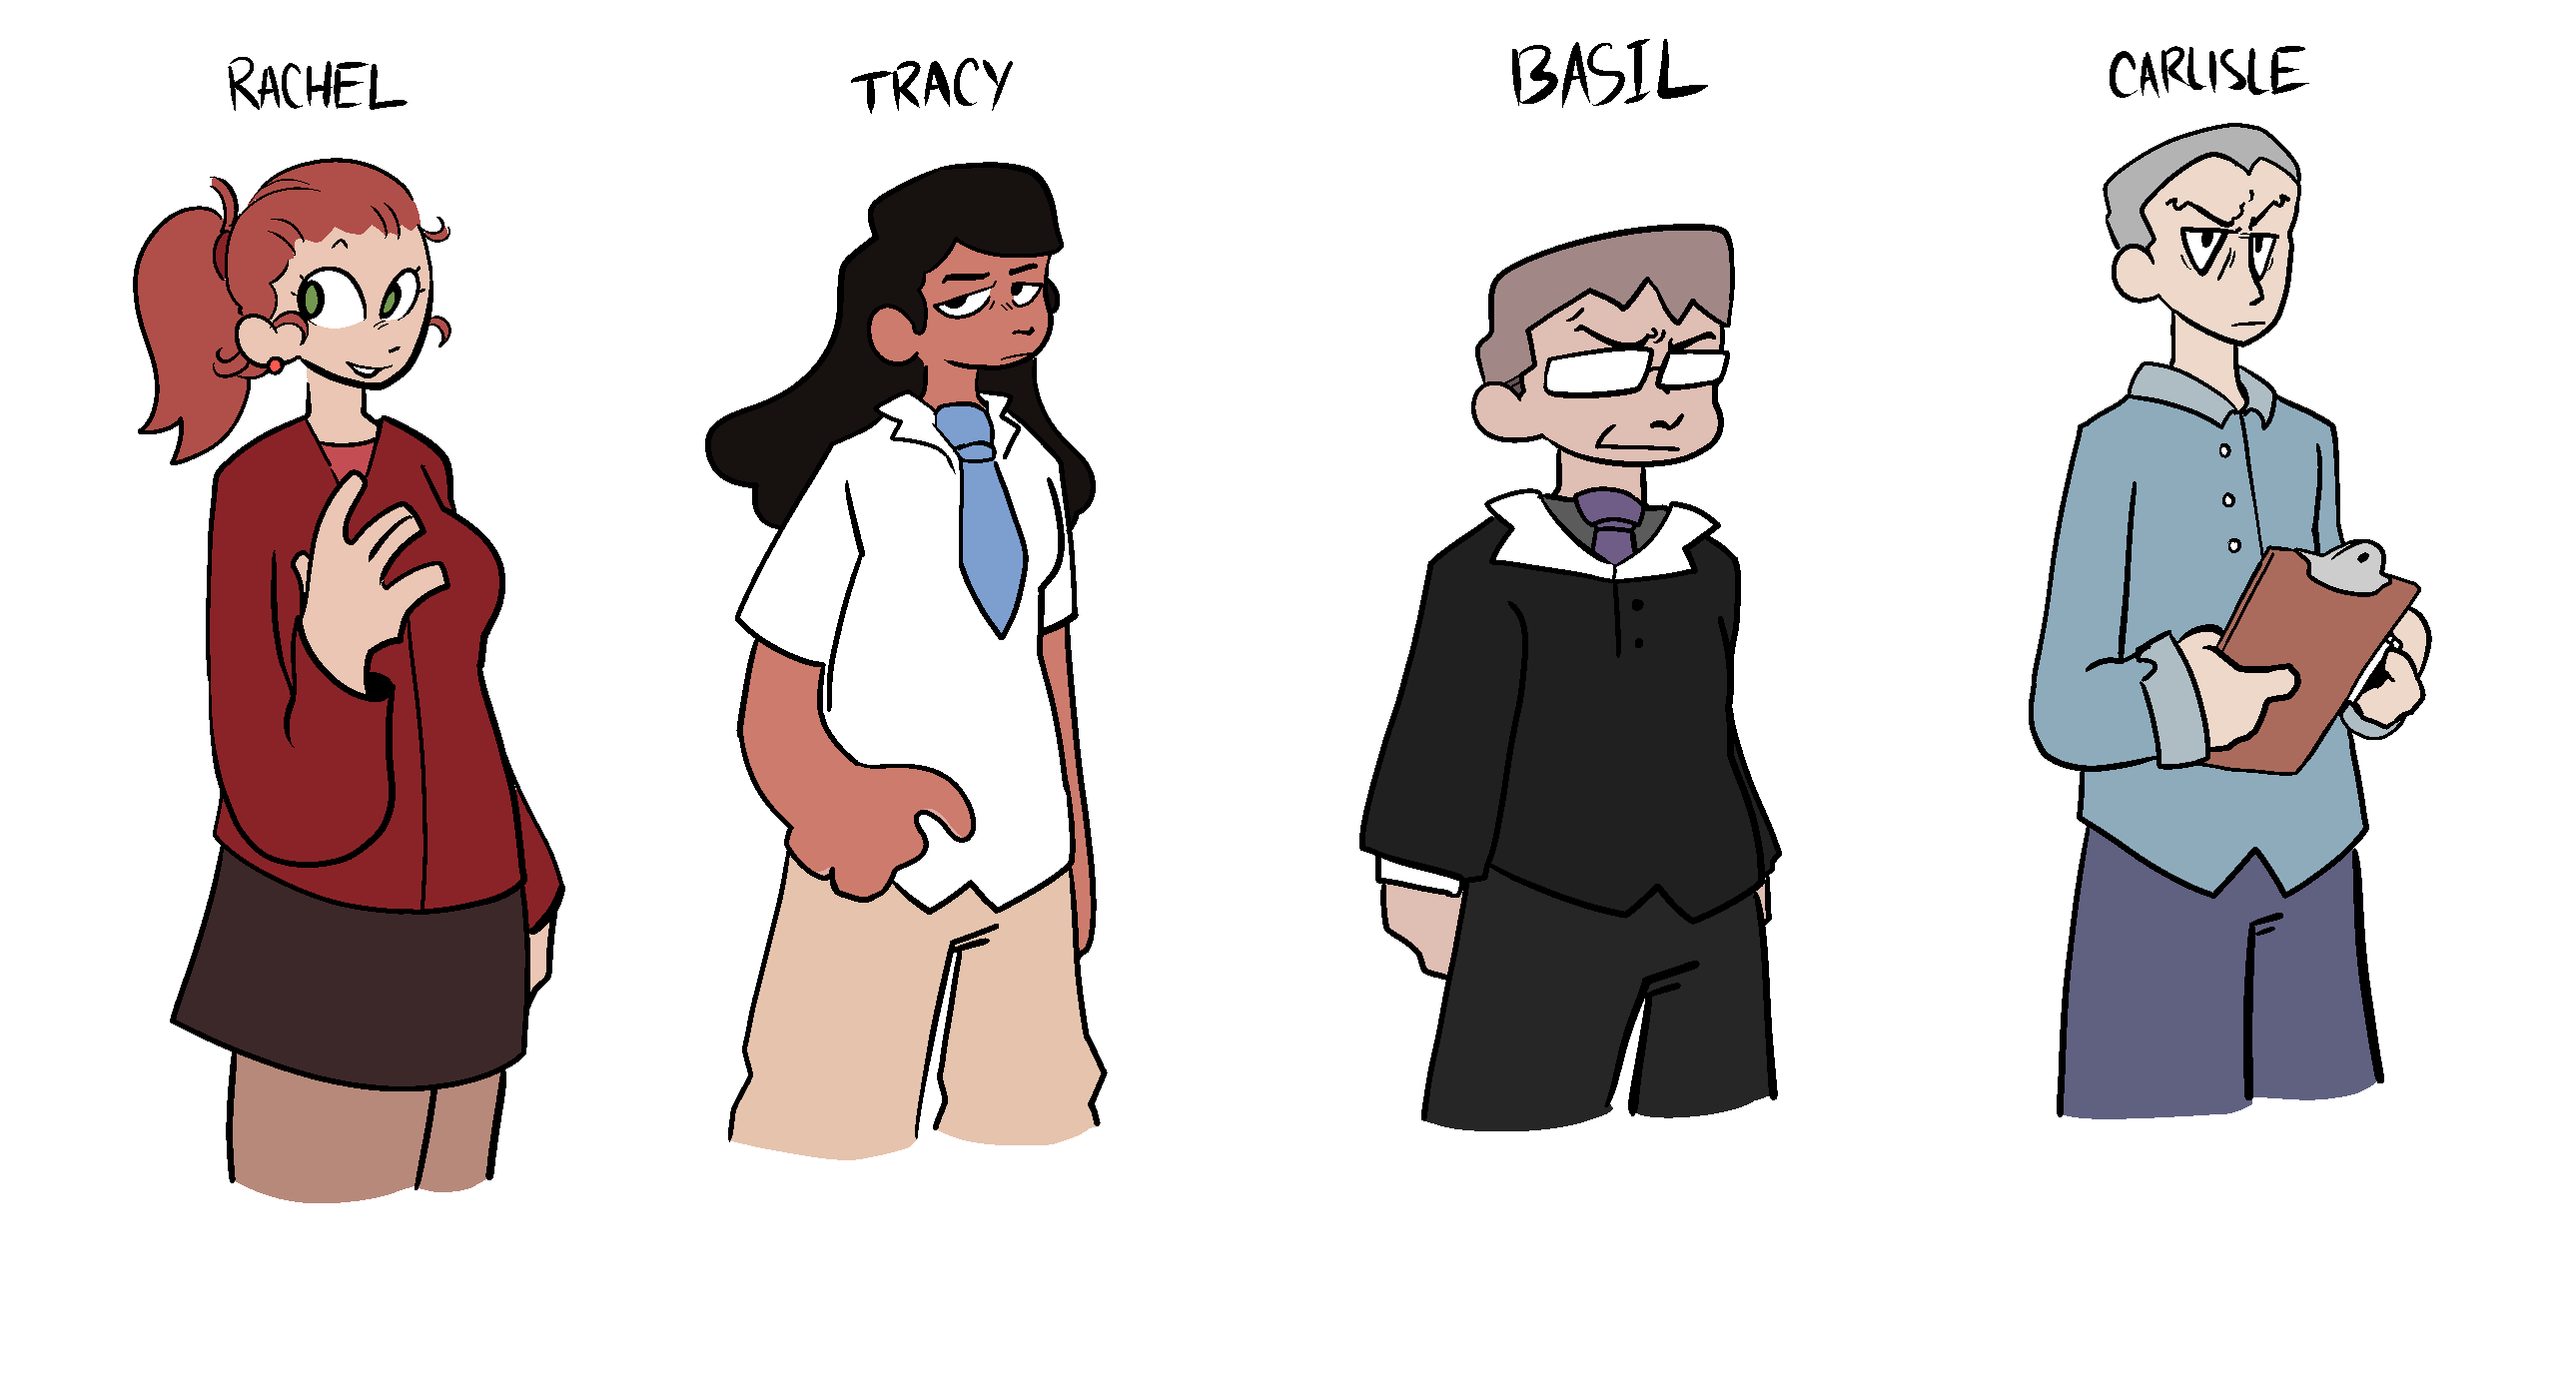 Early iterations of the Commonplace characters Rachel, Tracy, Basil, and Carlisle.